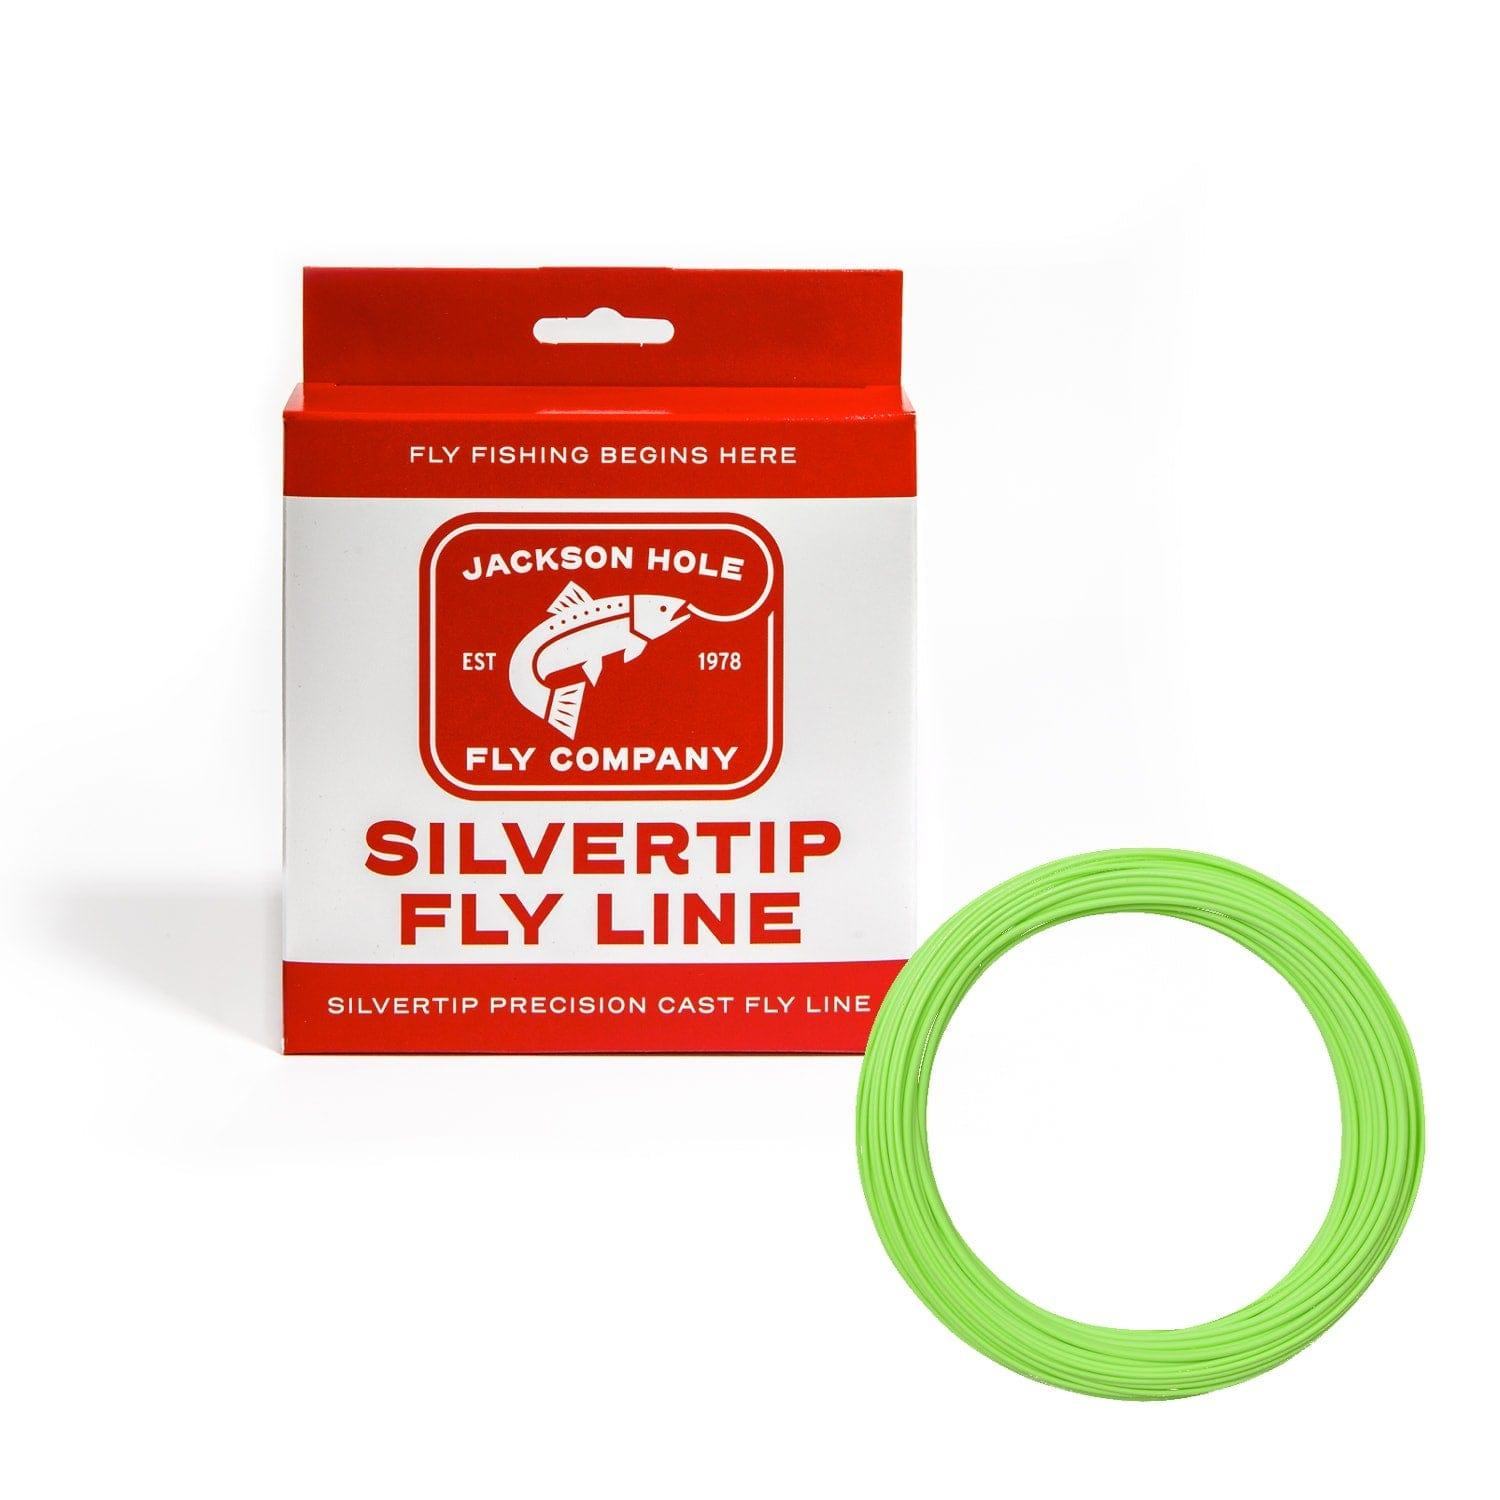 Silvertip 10' Sink Tip Weight Forward Fly Line by Jackson Hole Fly Company 10wt / Green / 90